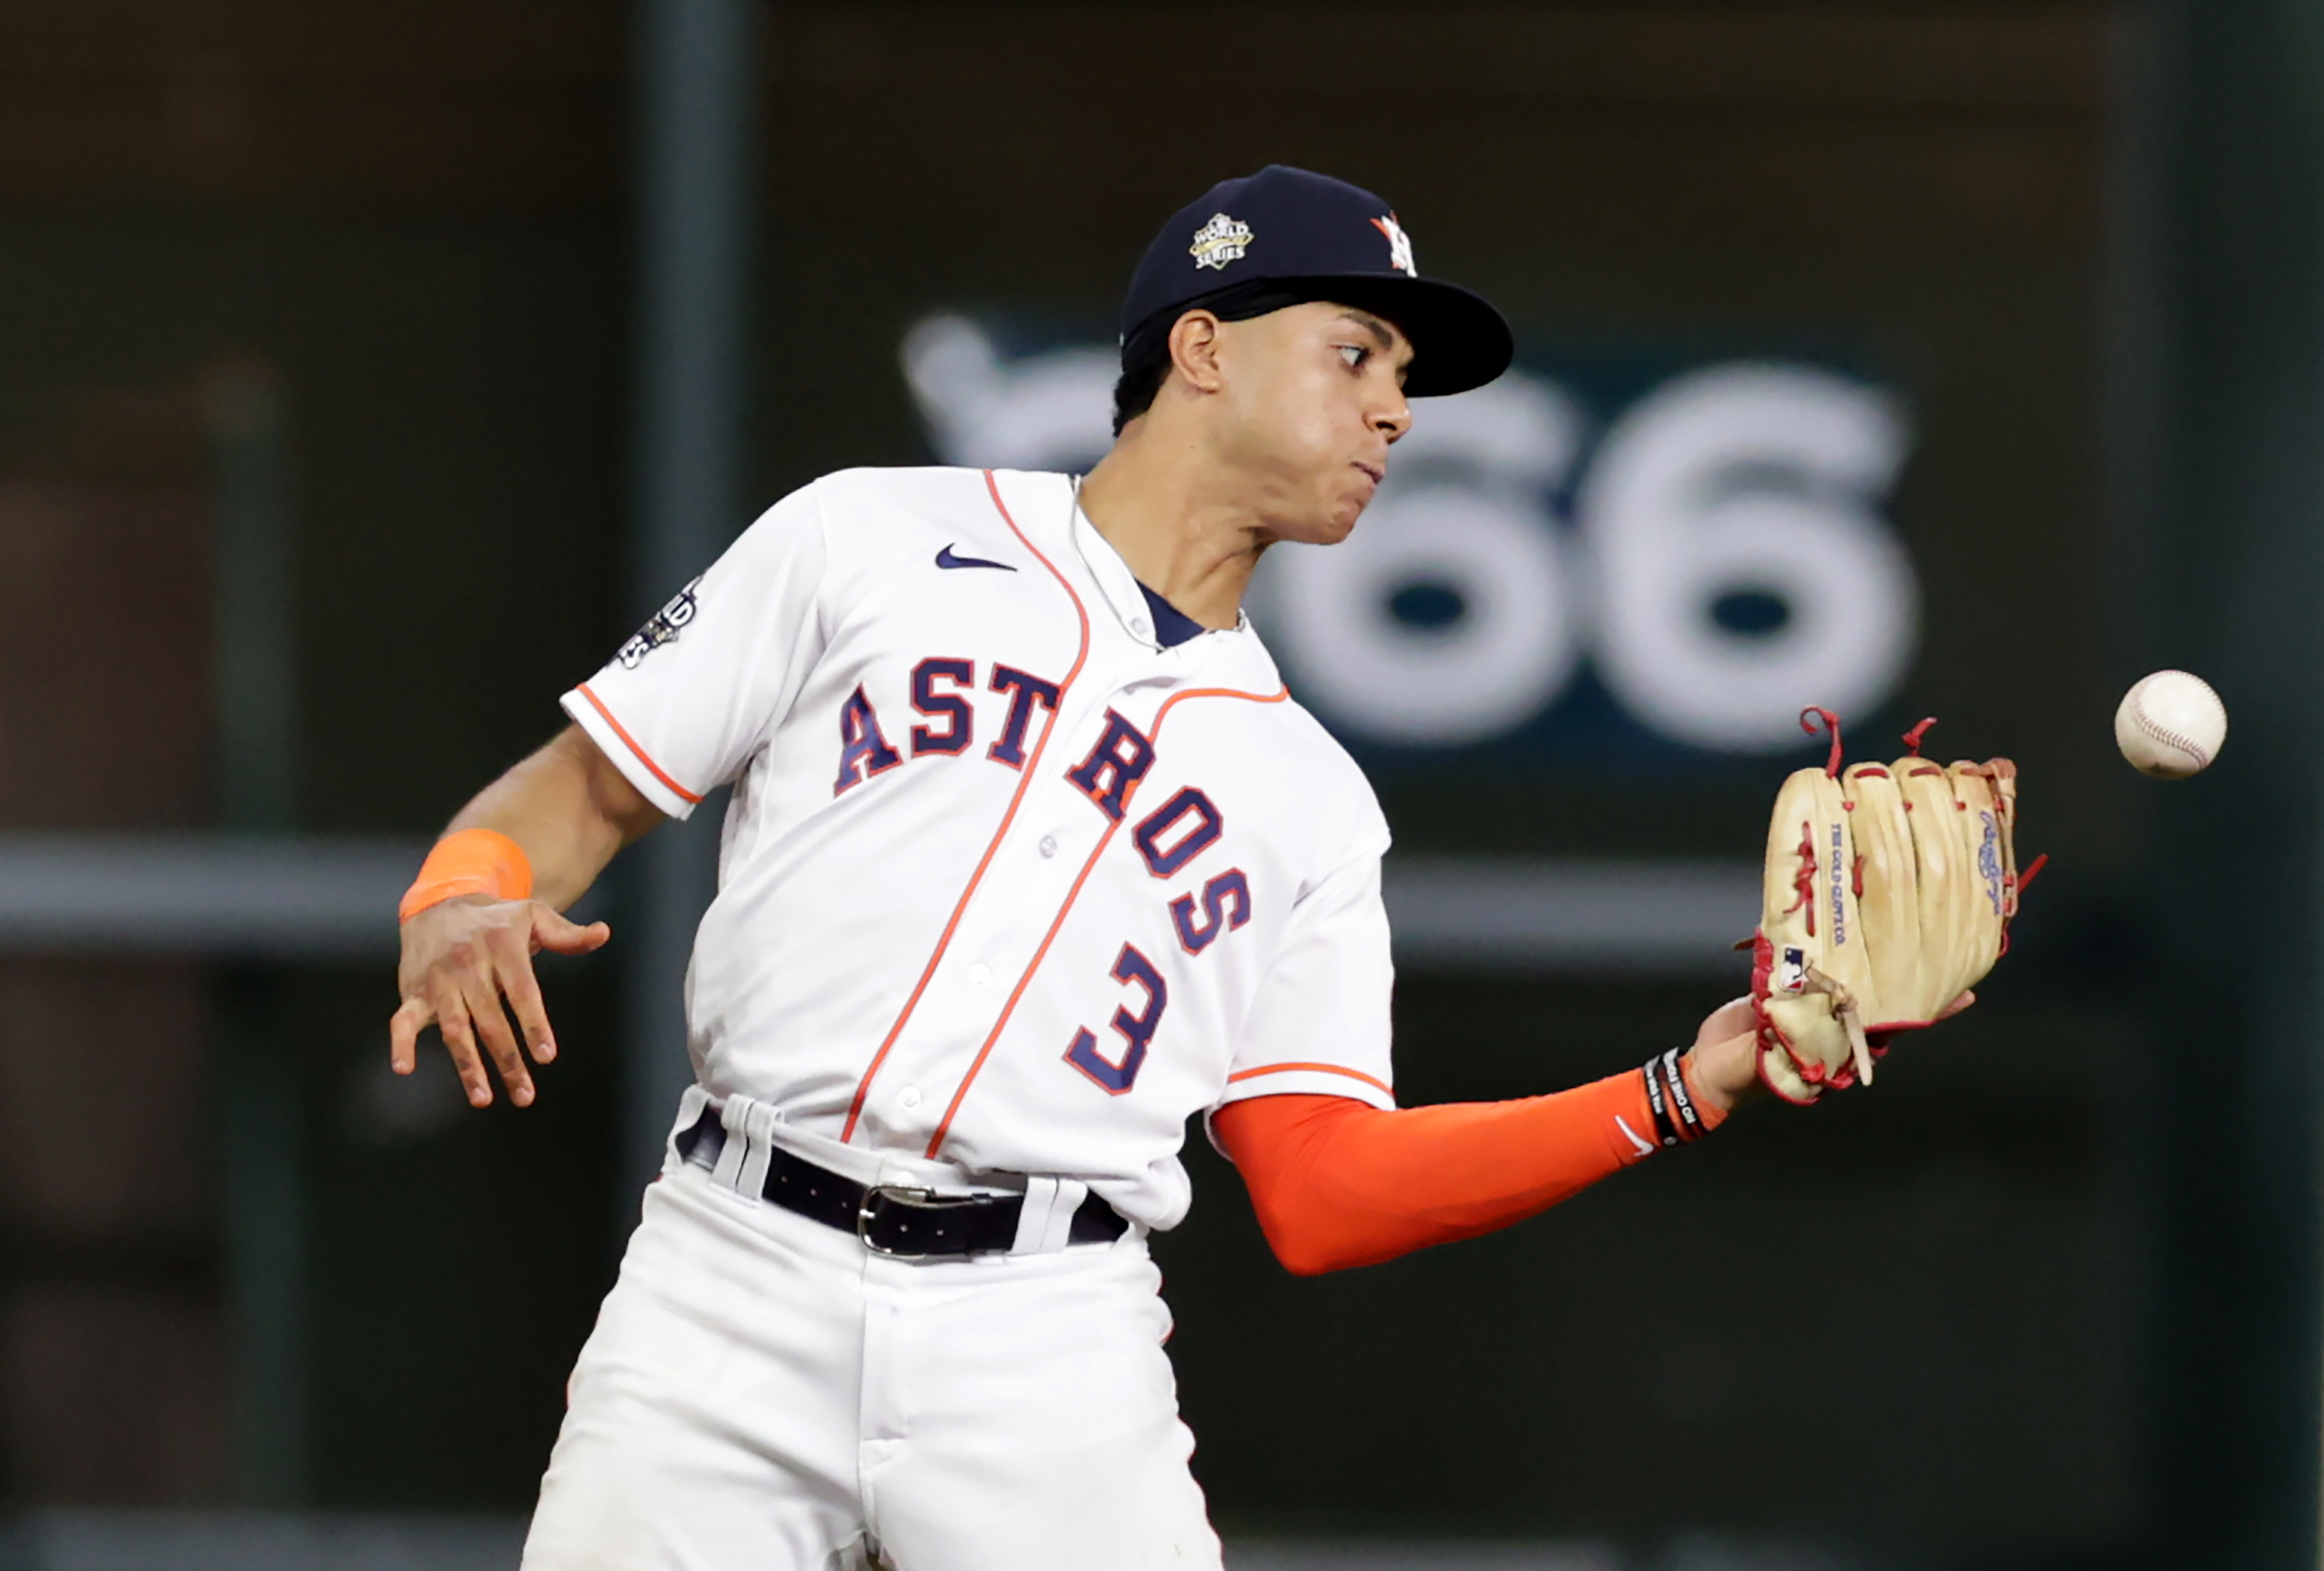 Astros vs. Braves World Series Game 3 starting lineups and pitching matchup